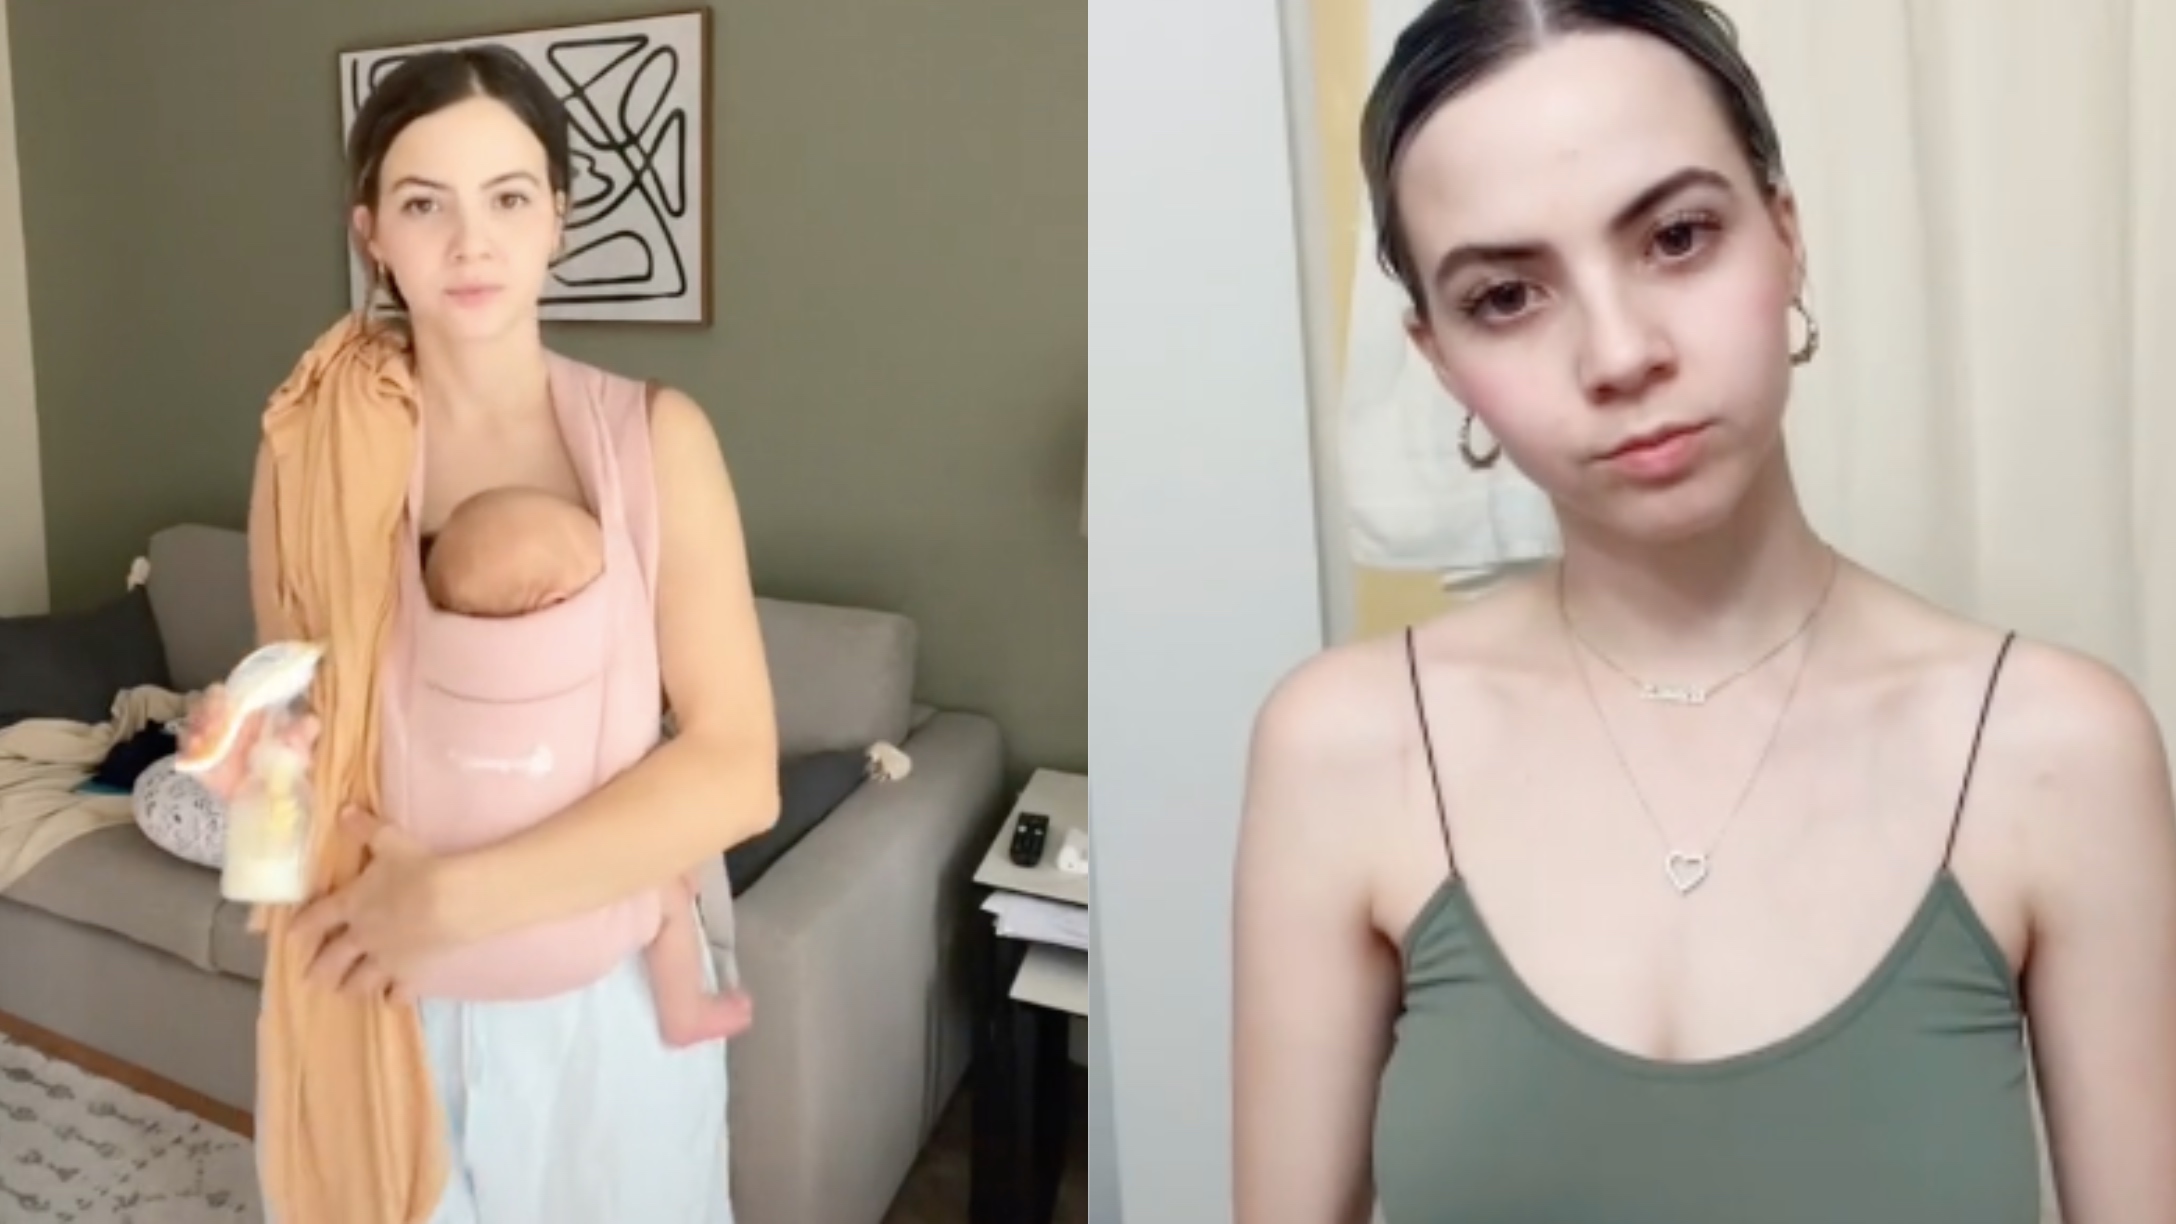 Is it normal if one Breast is Bigger than the other?- Uneven